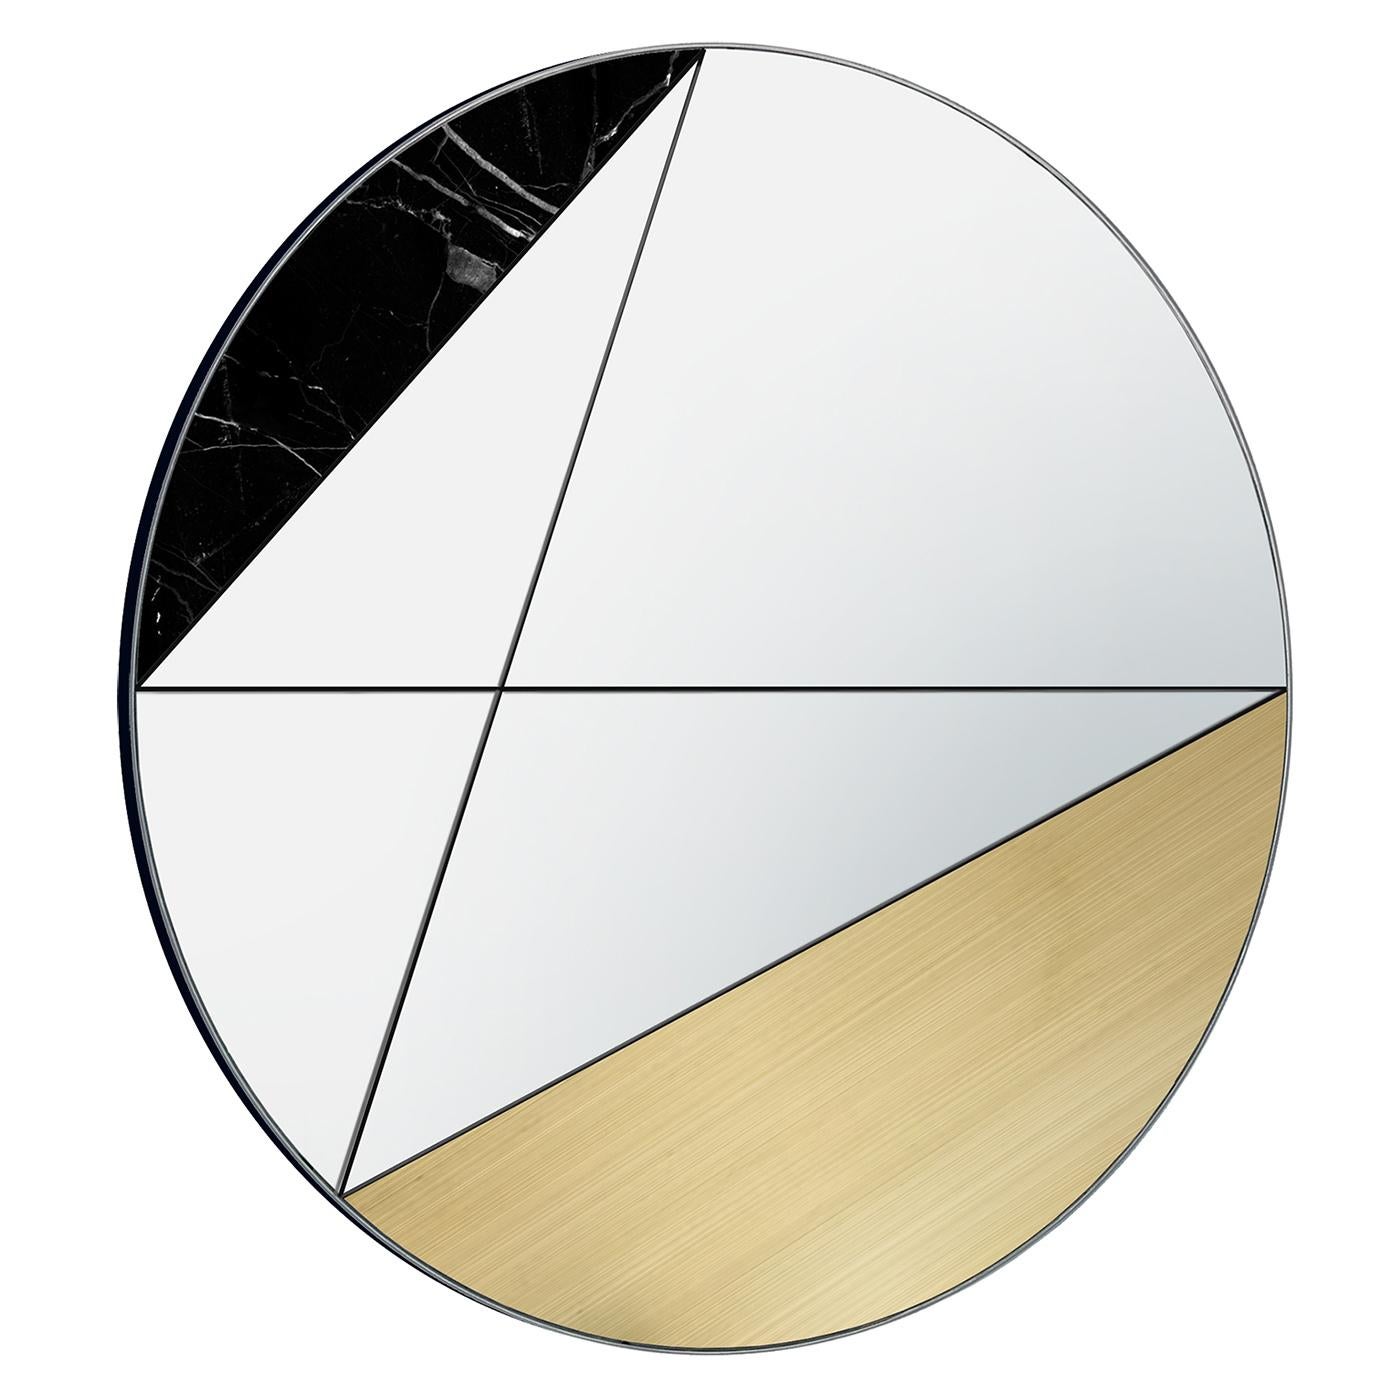 From a unique collection of decorative mirrors made exclusively by hand, this version of the Clepsydra Mirror features an alluring juxtaposition of Marquinia marble and brushed brass. With the opposing tones on each end, the mirror is crossed by